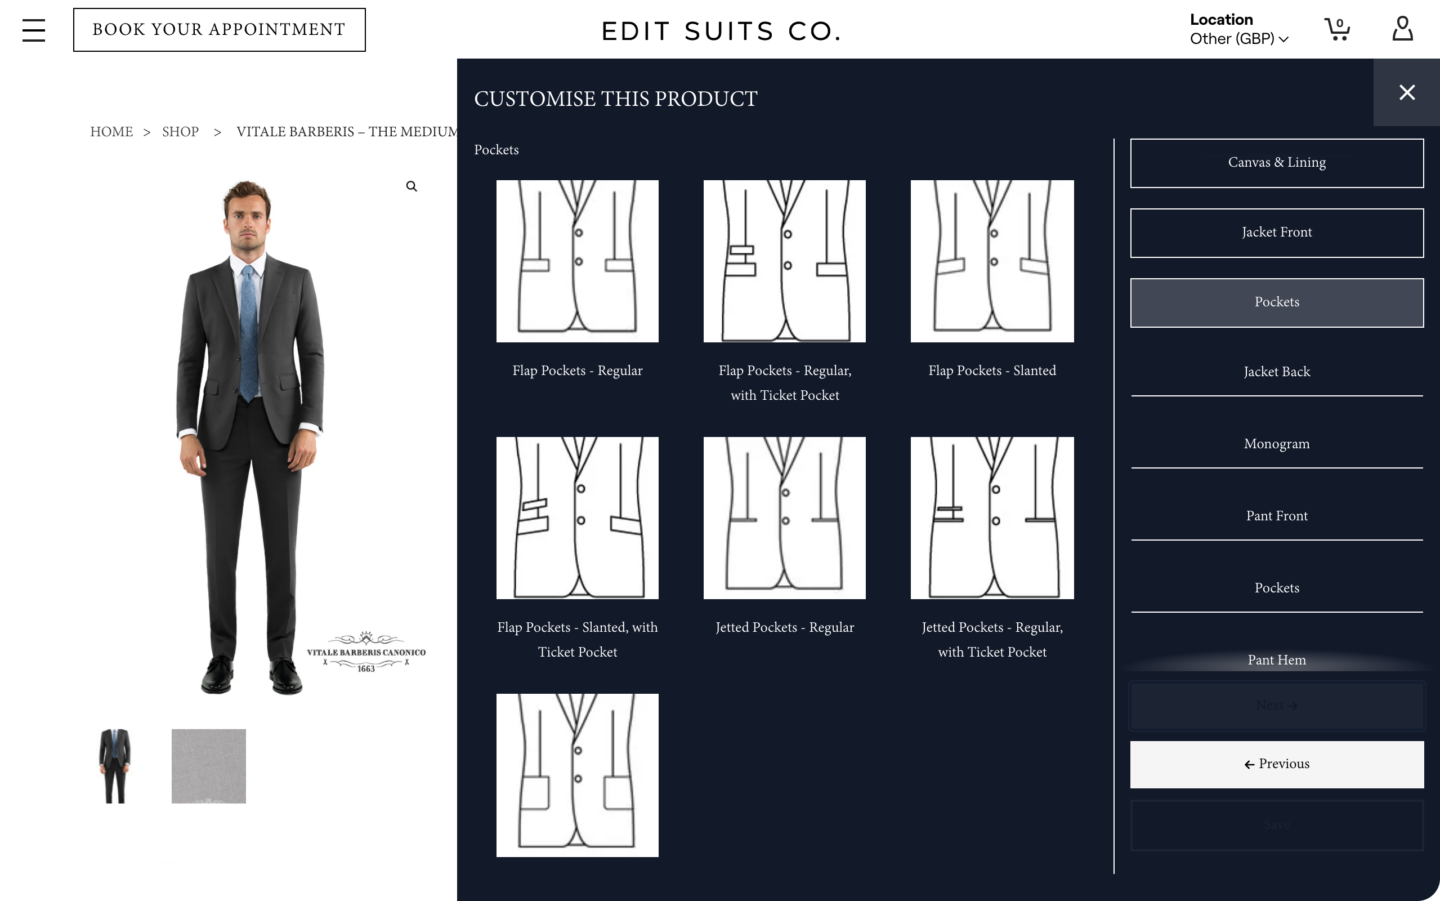 Edit Suits Co.: Product Page